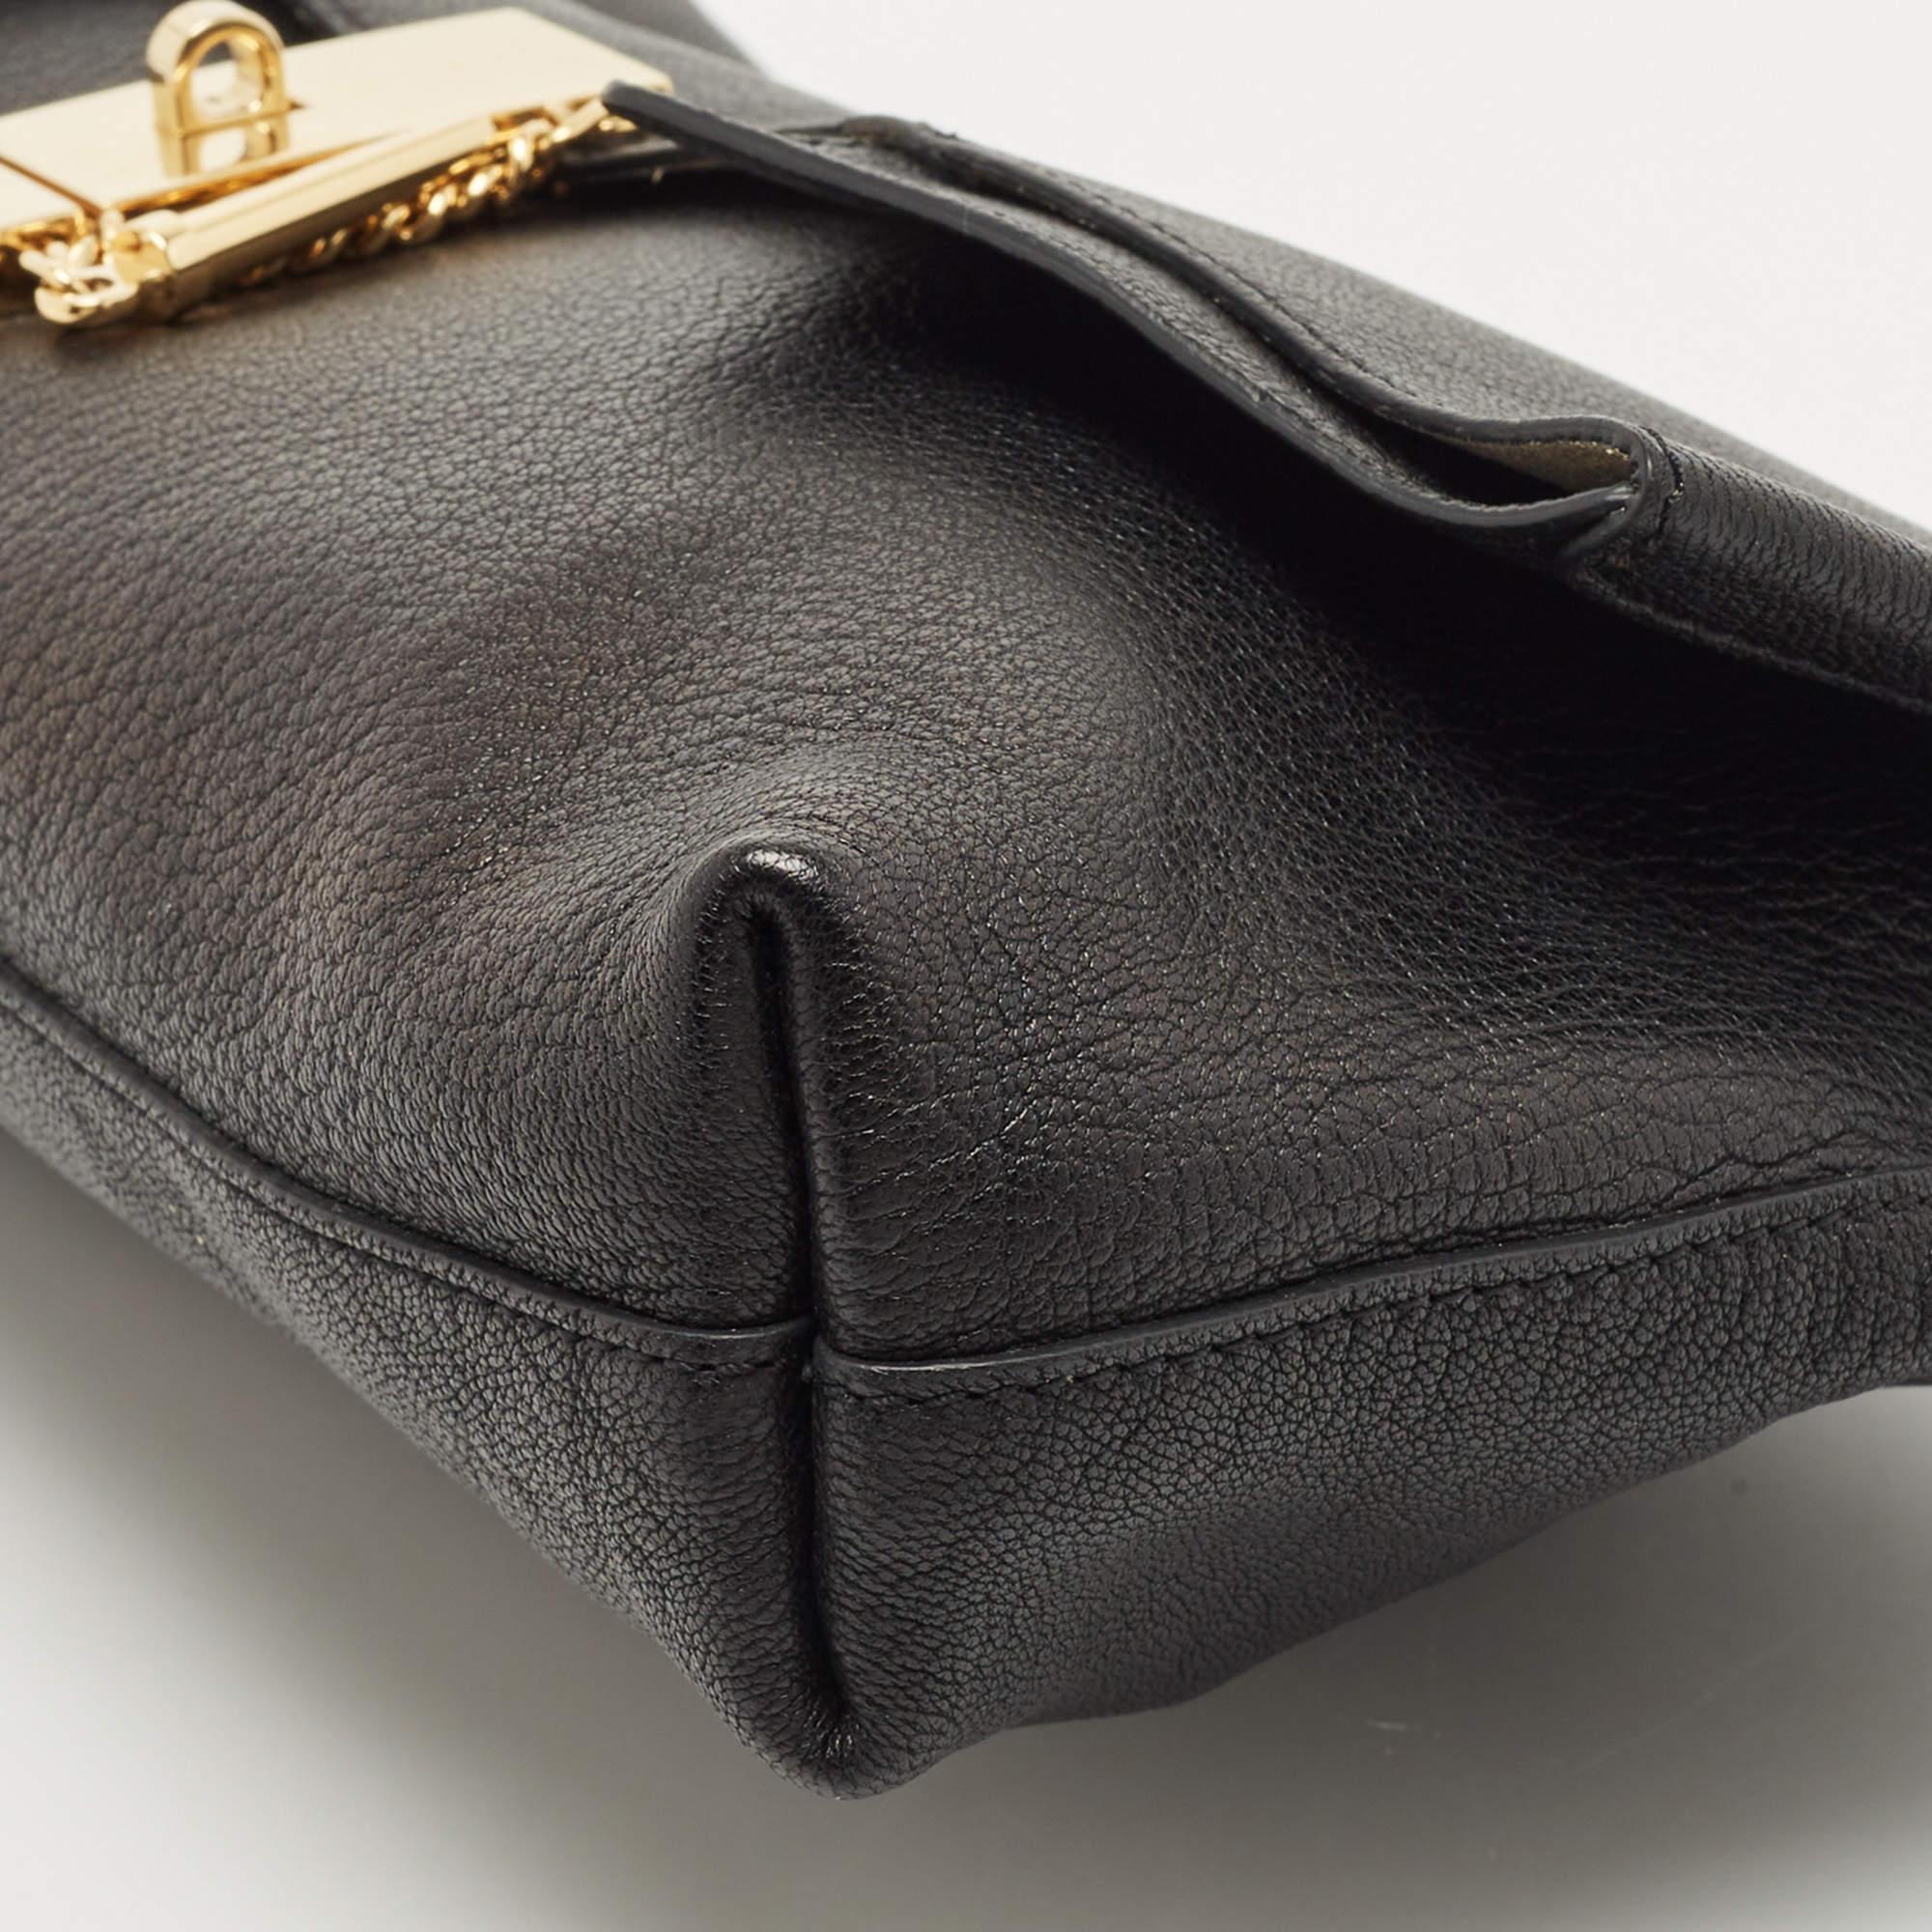 Chloe Black Grained Leather Drew Fold Over Clutch 2